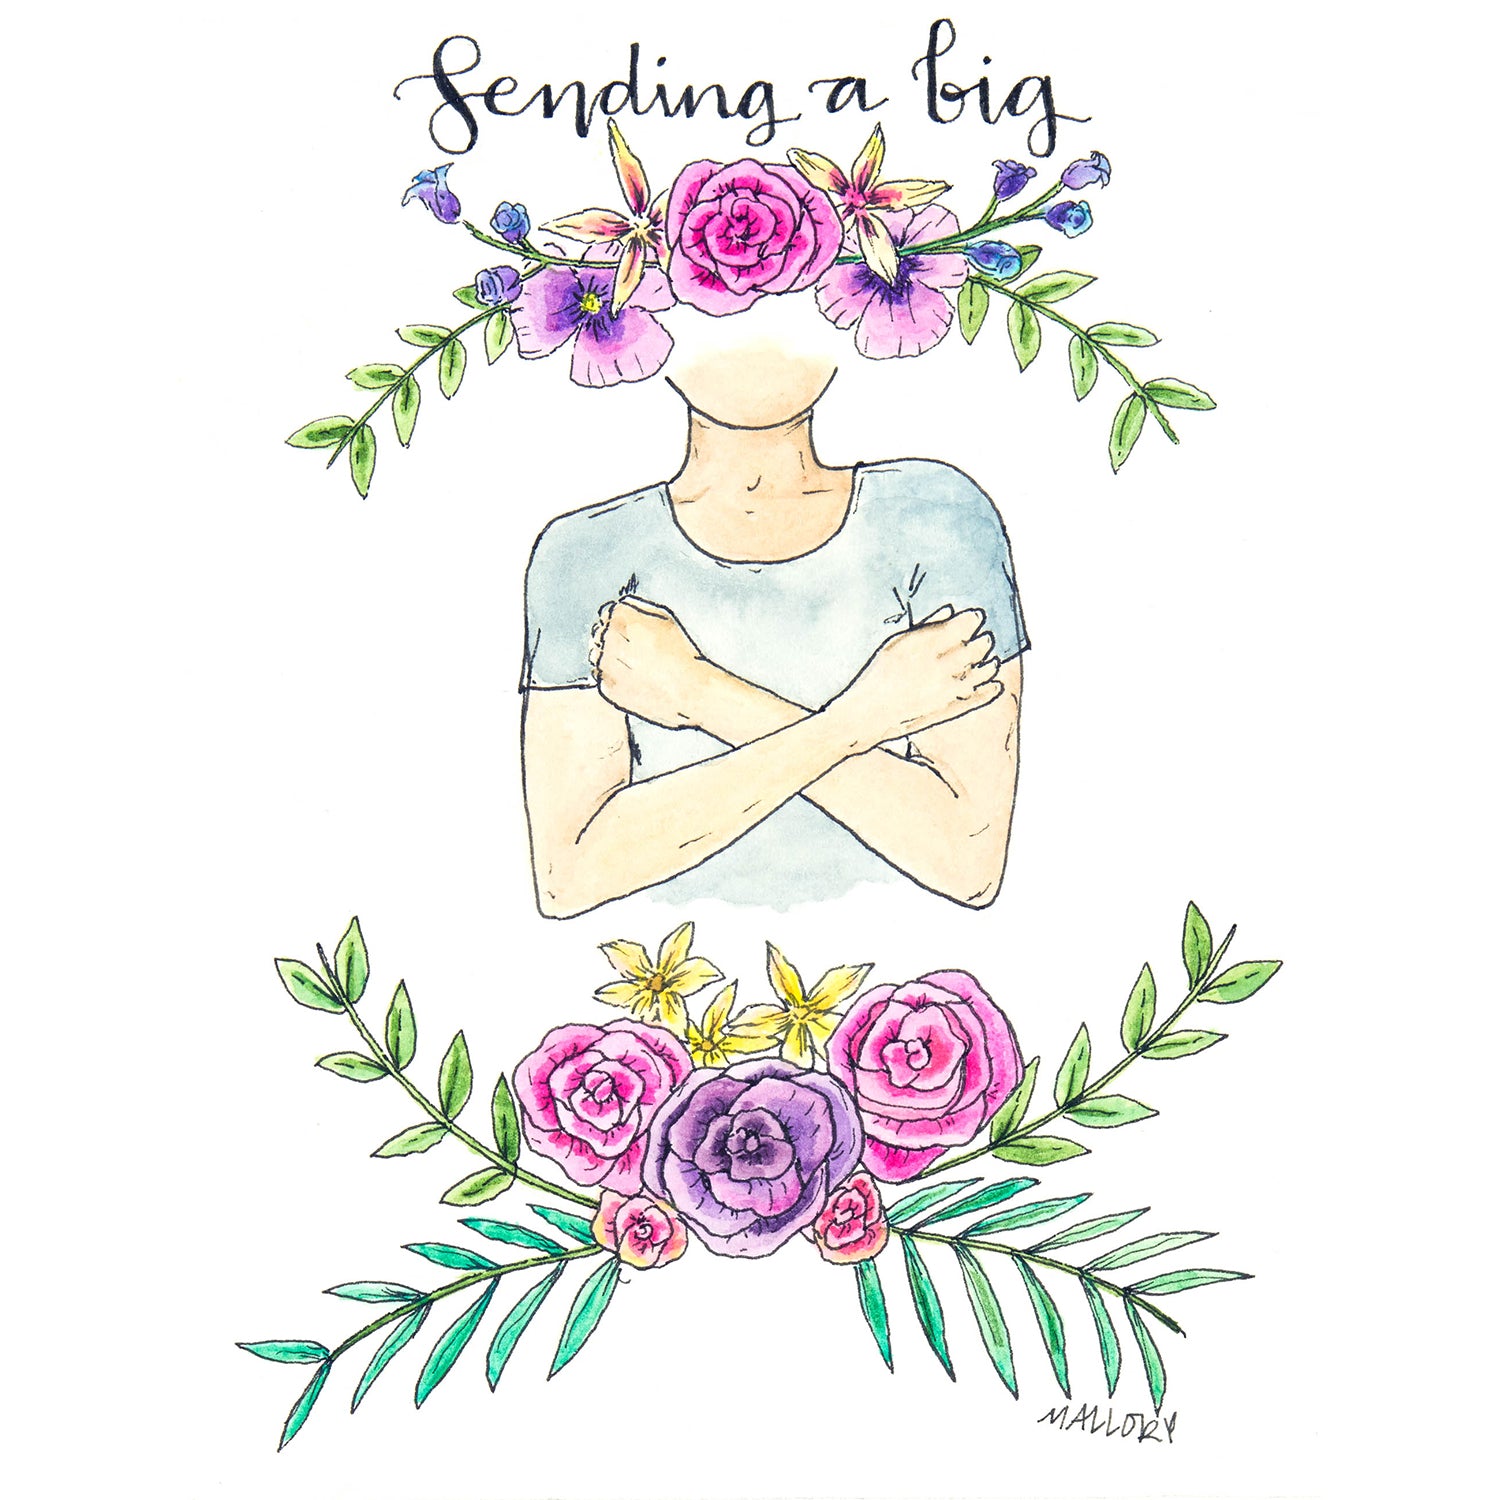 Greeting card with pink and purple flowers, with the American Sign Language symbol for hug. The person depicted has a dark skin tone. The words, "Sending a big" is hand-lettered at the top.